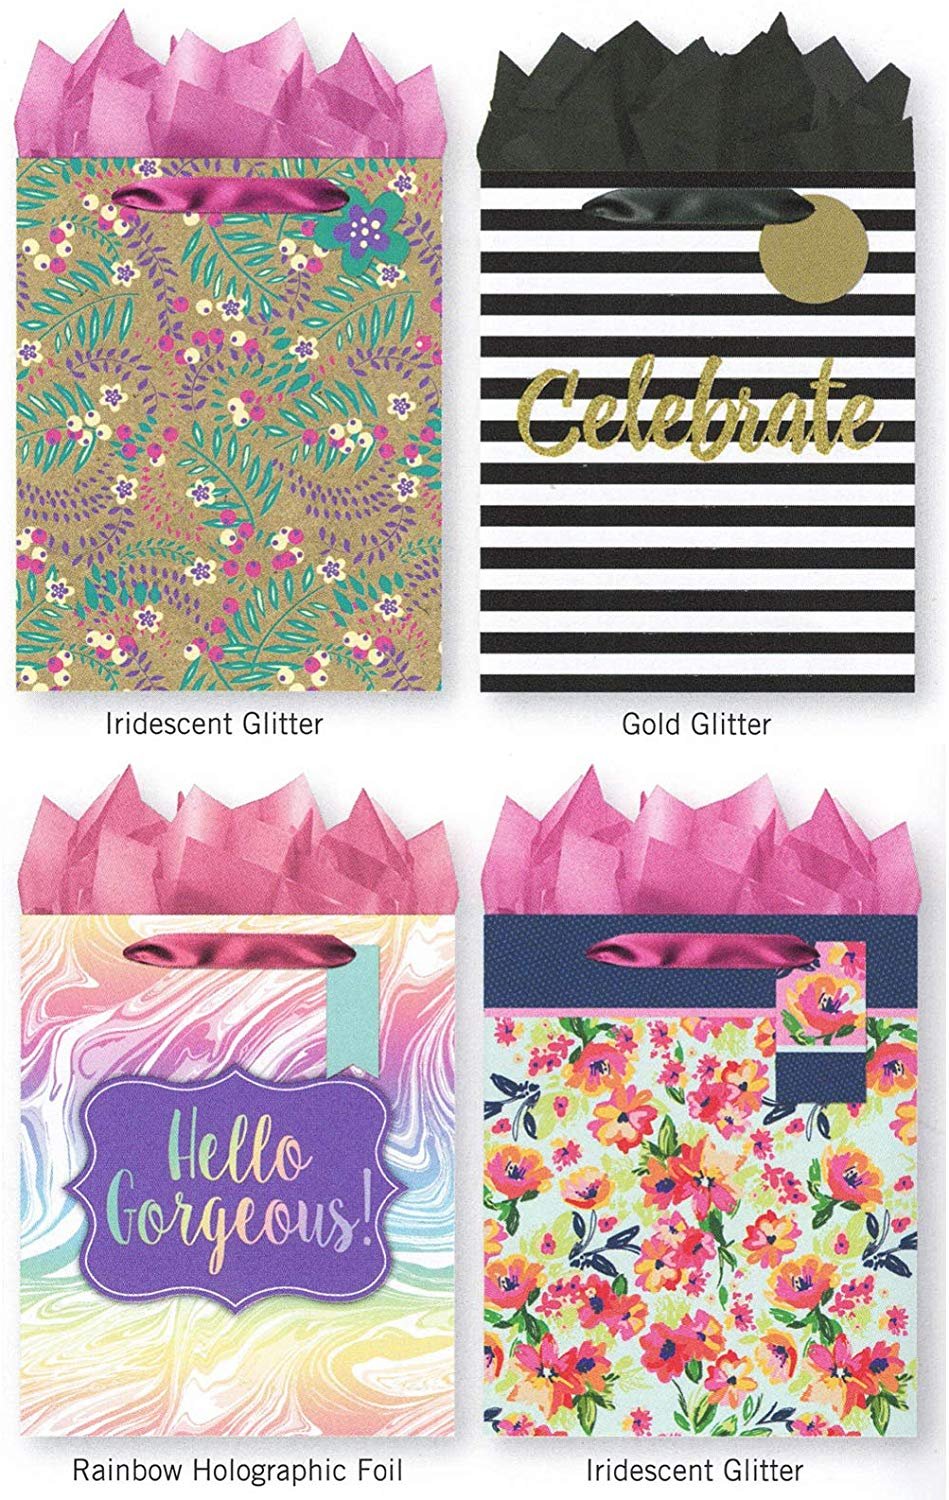 Pack of 4 Large All Occasion Gift Bags. Assortment of Foil and Glitter Embellishments